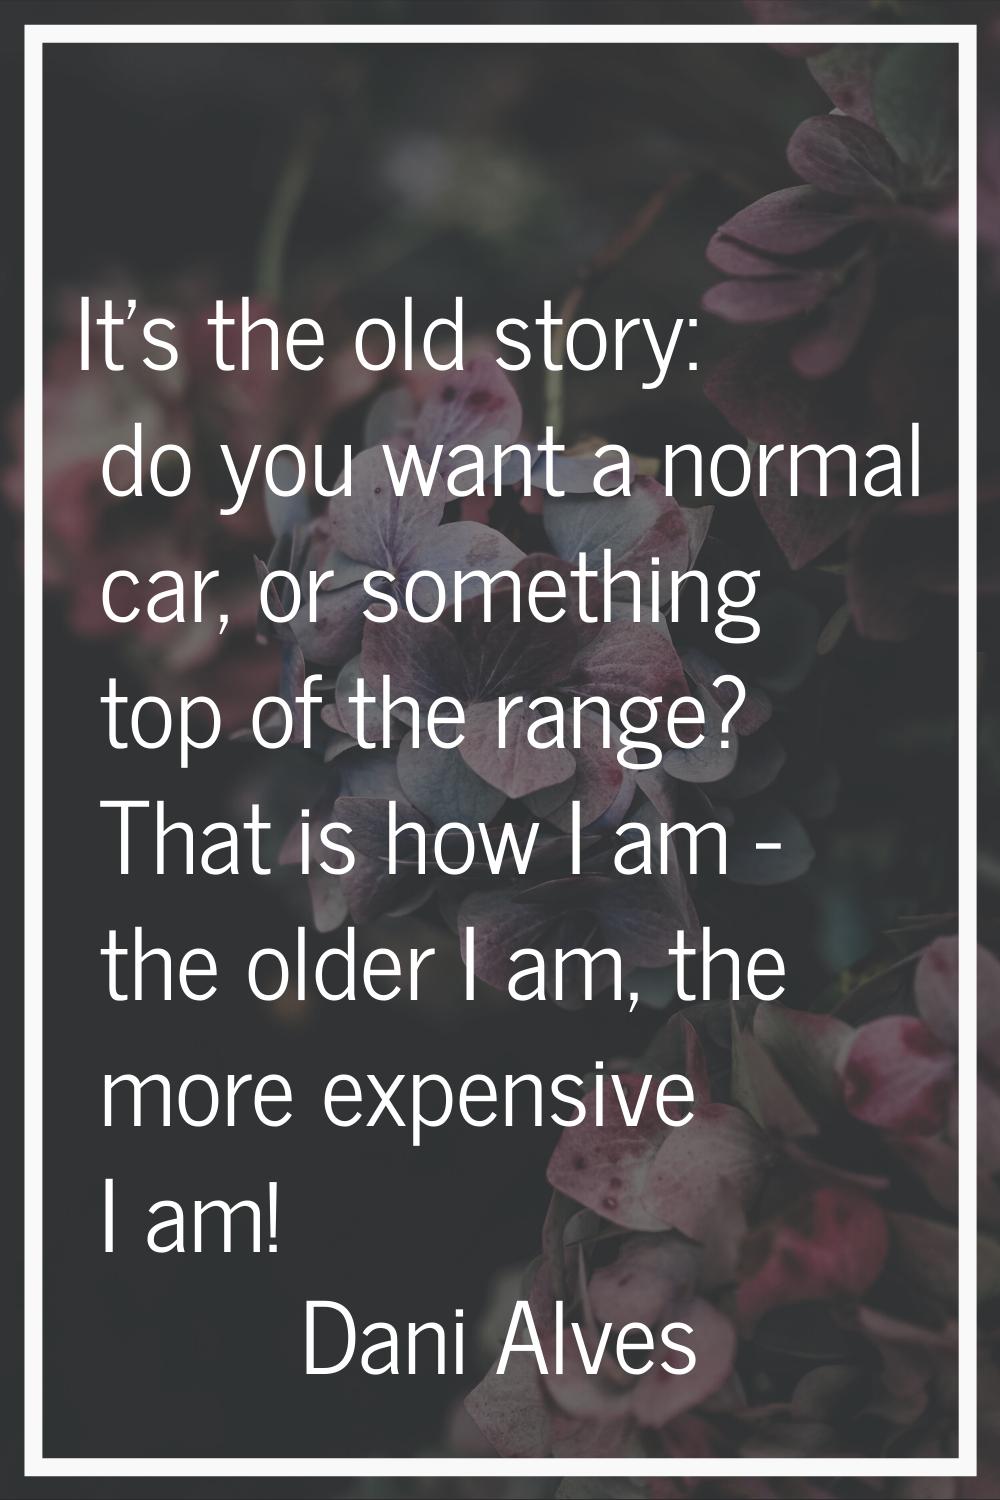 It's the old story: do you want a normal car, or something top of the range? That is how I am - the